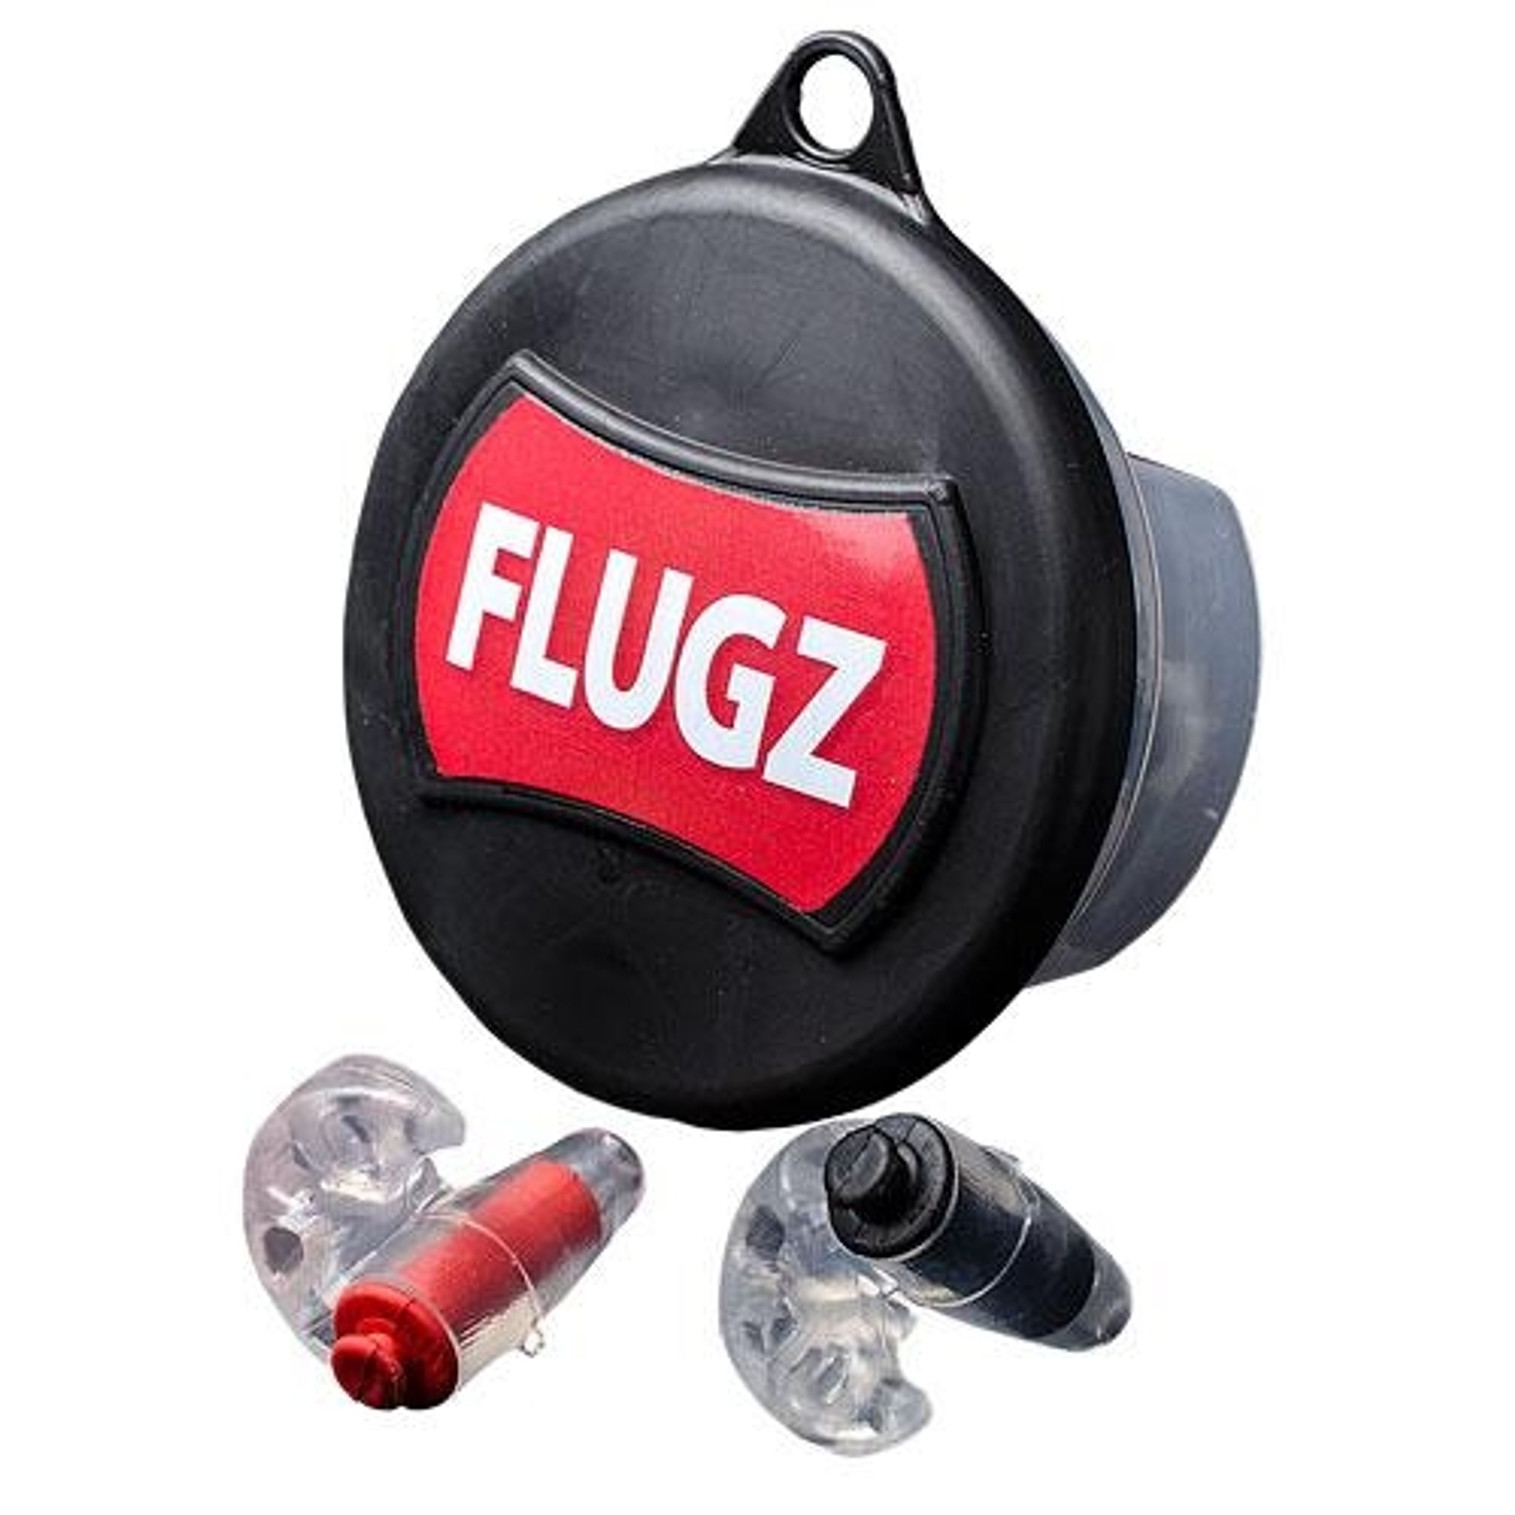 Flugz 21Db Hearing Protection